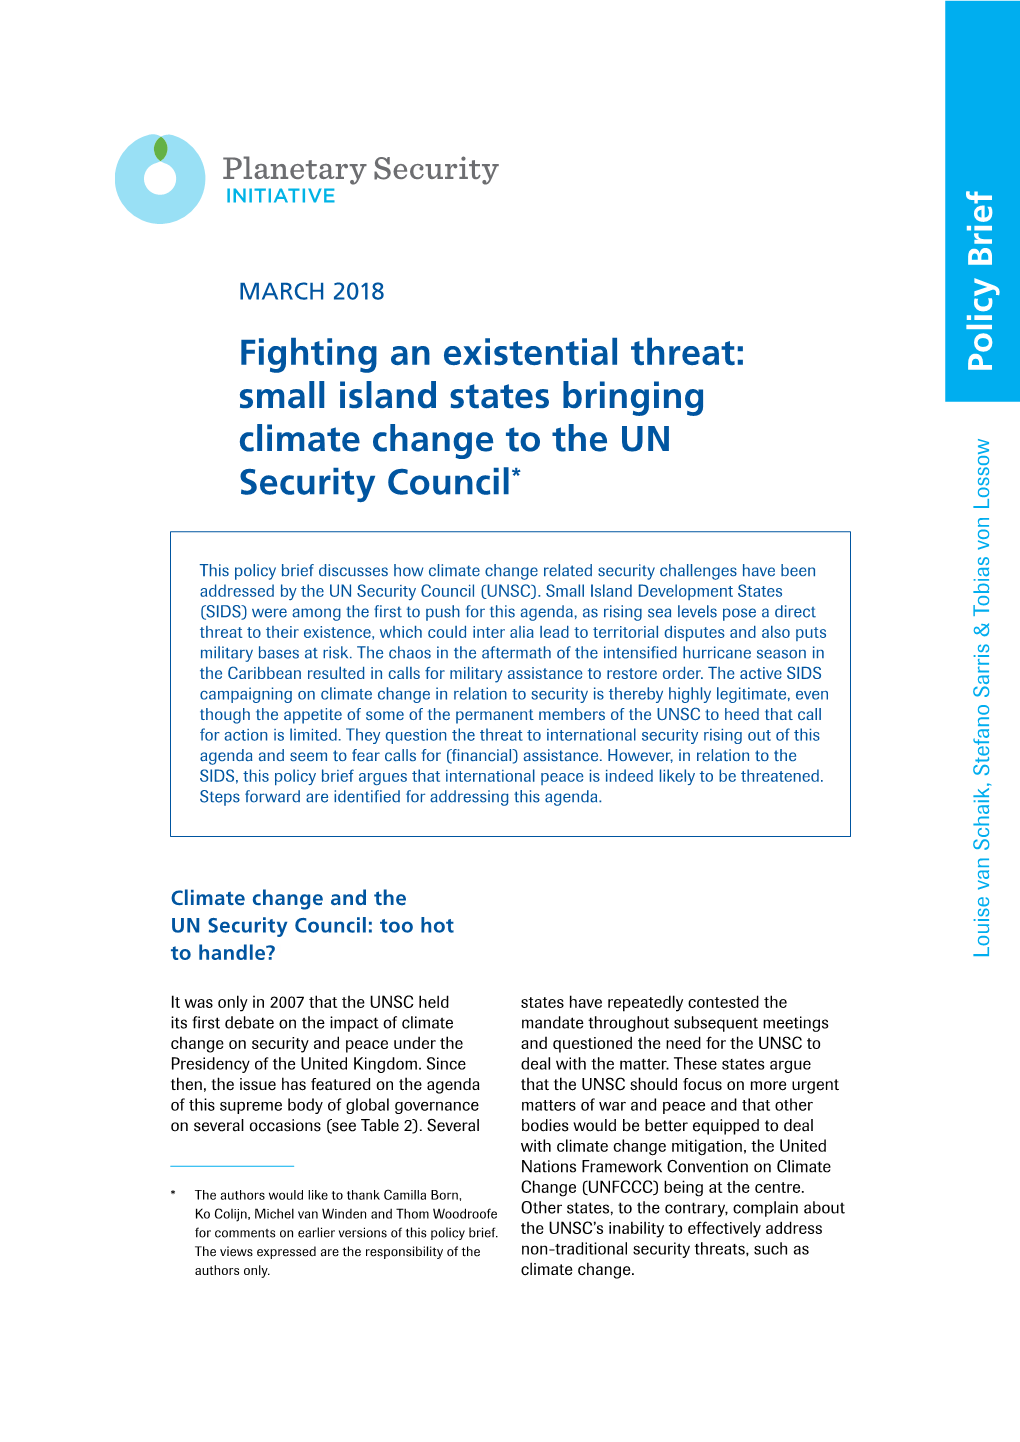 Small Island States Bringing Climate Change to the UN Security Council